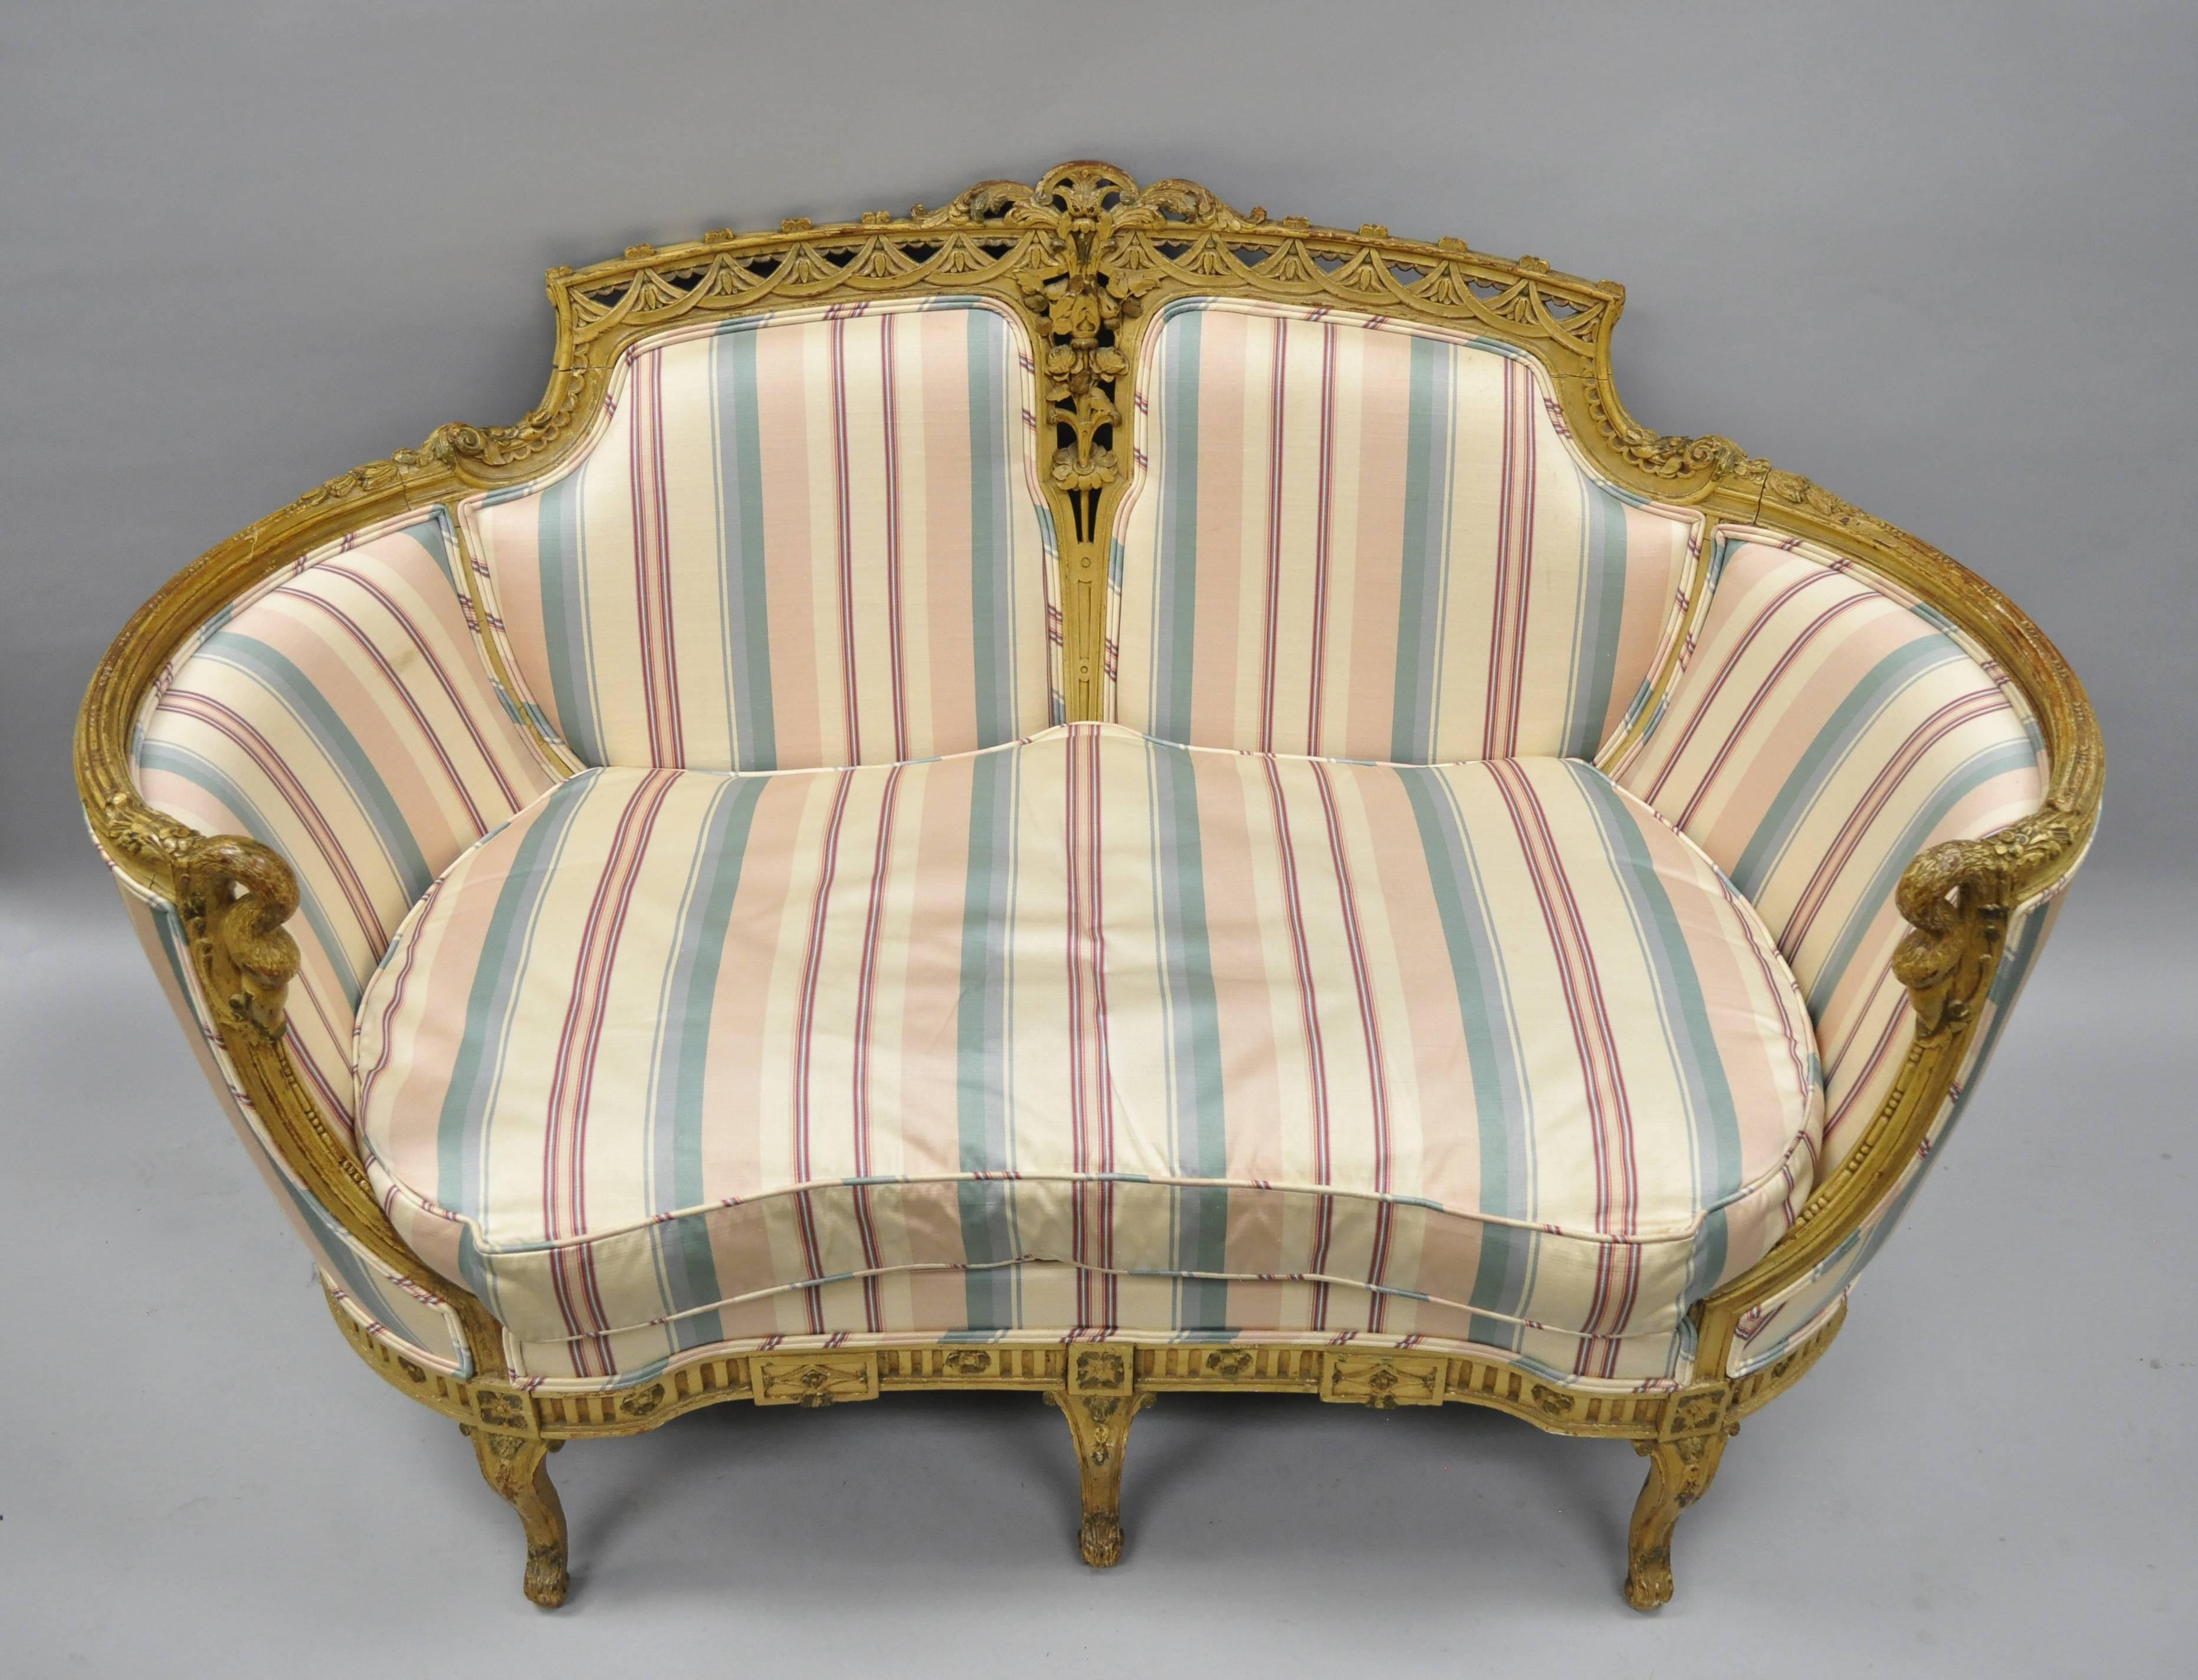 Antique French Regency style swan carved settee. Item features shapely swan carved arms, floral and drape carved backrest, unique oval frame, solid wood construction, cream distress painted finish, seven cabriole legs, and great style and form,